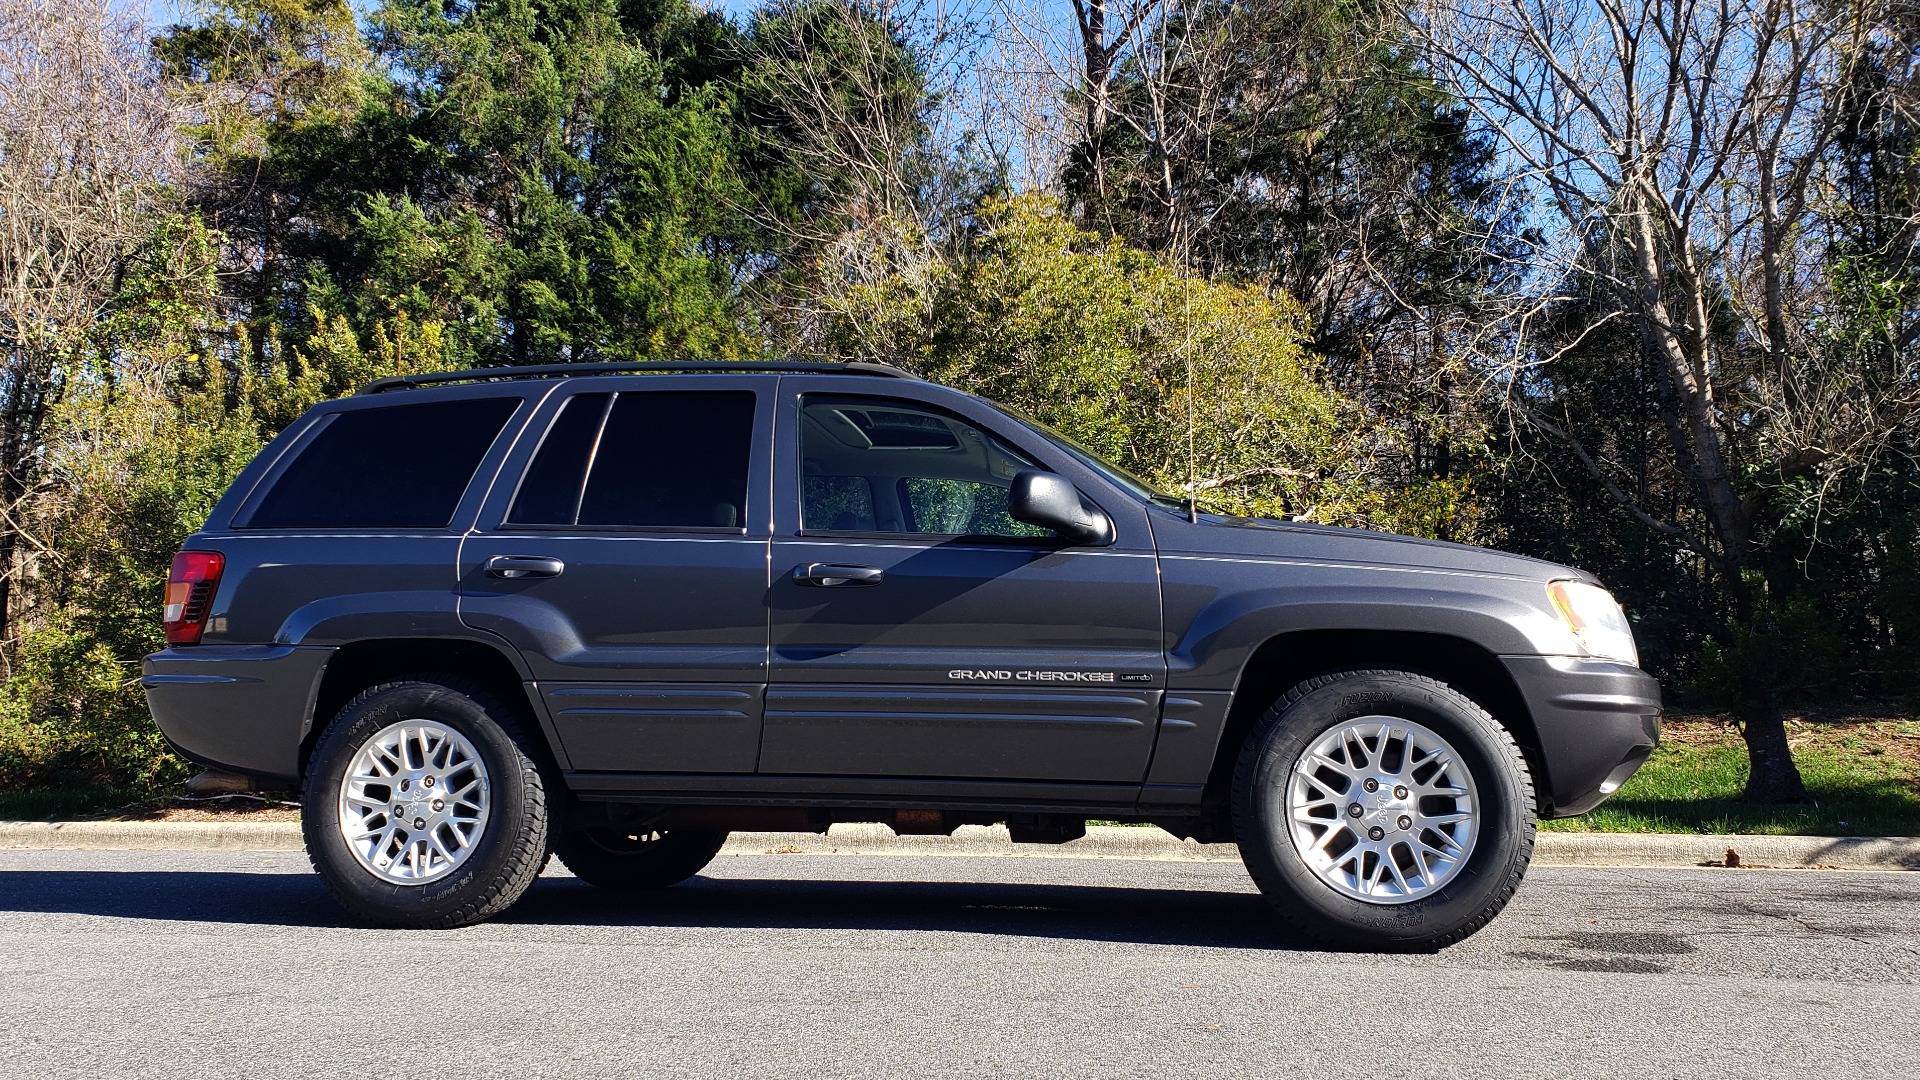 Used 2002 Jeep GRAND CHEROKEE LIMITED 4X4 / SUNROOF / 4.7L V8 / 5-SPD AUTO / CLD WTHR for sale Sold at Formula Imports in Charlotte NC 28227 5